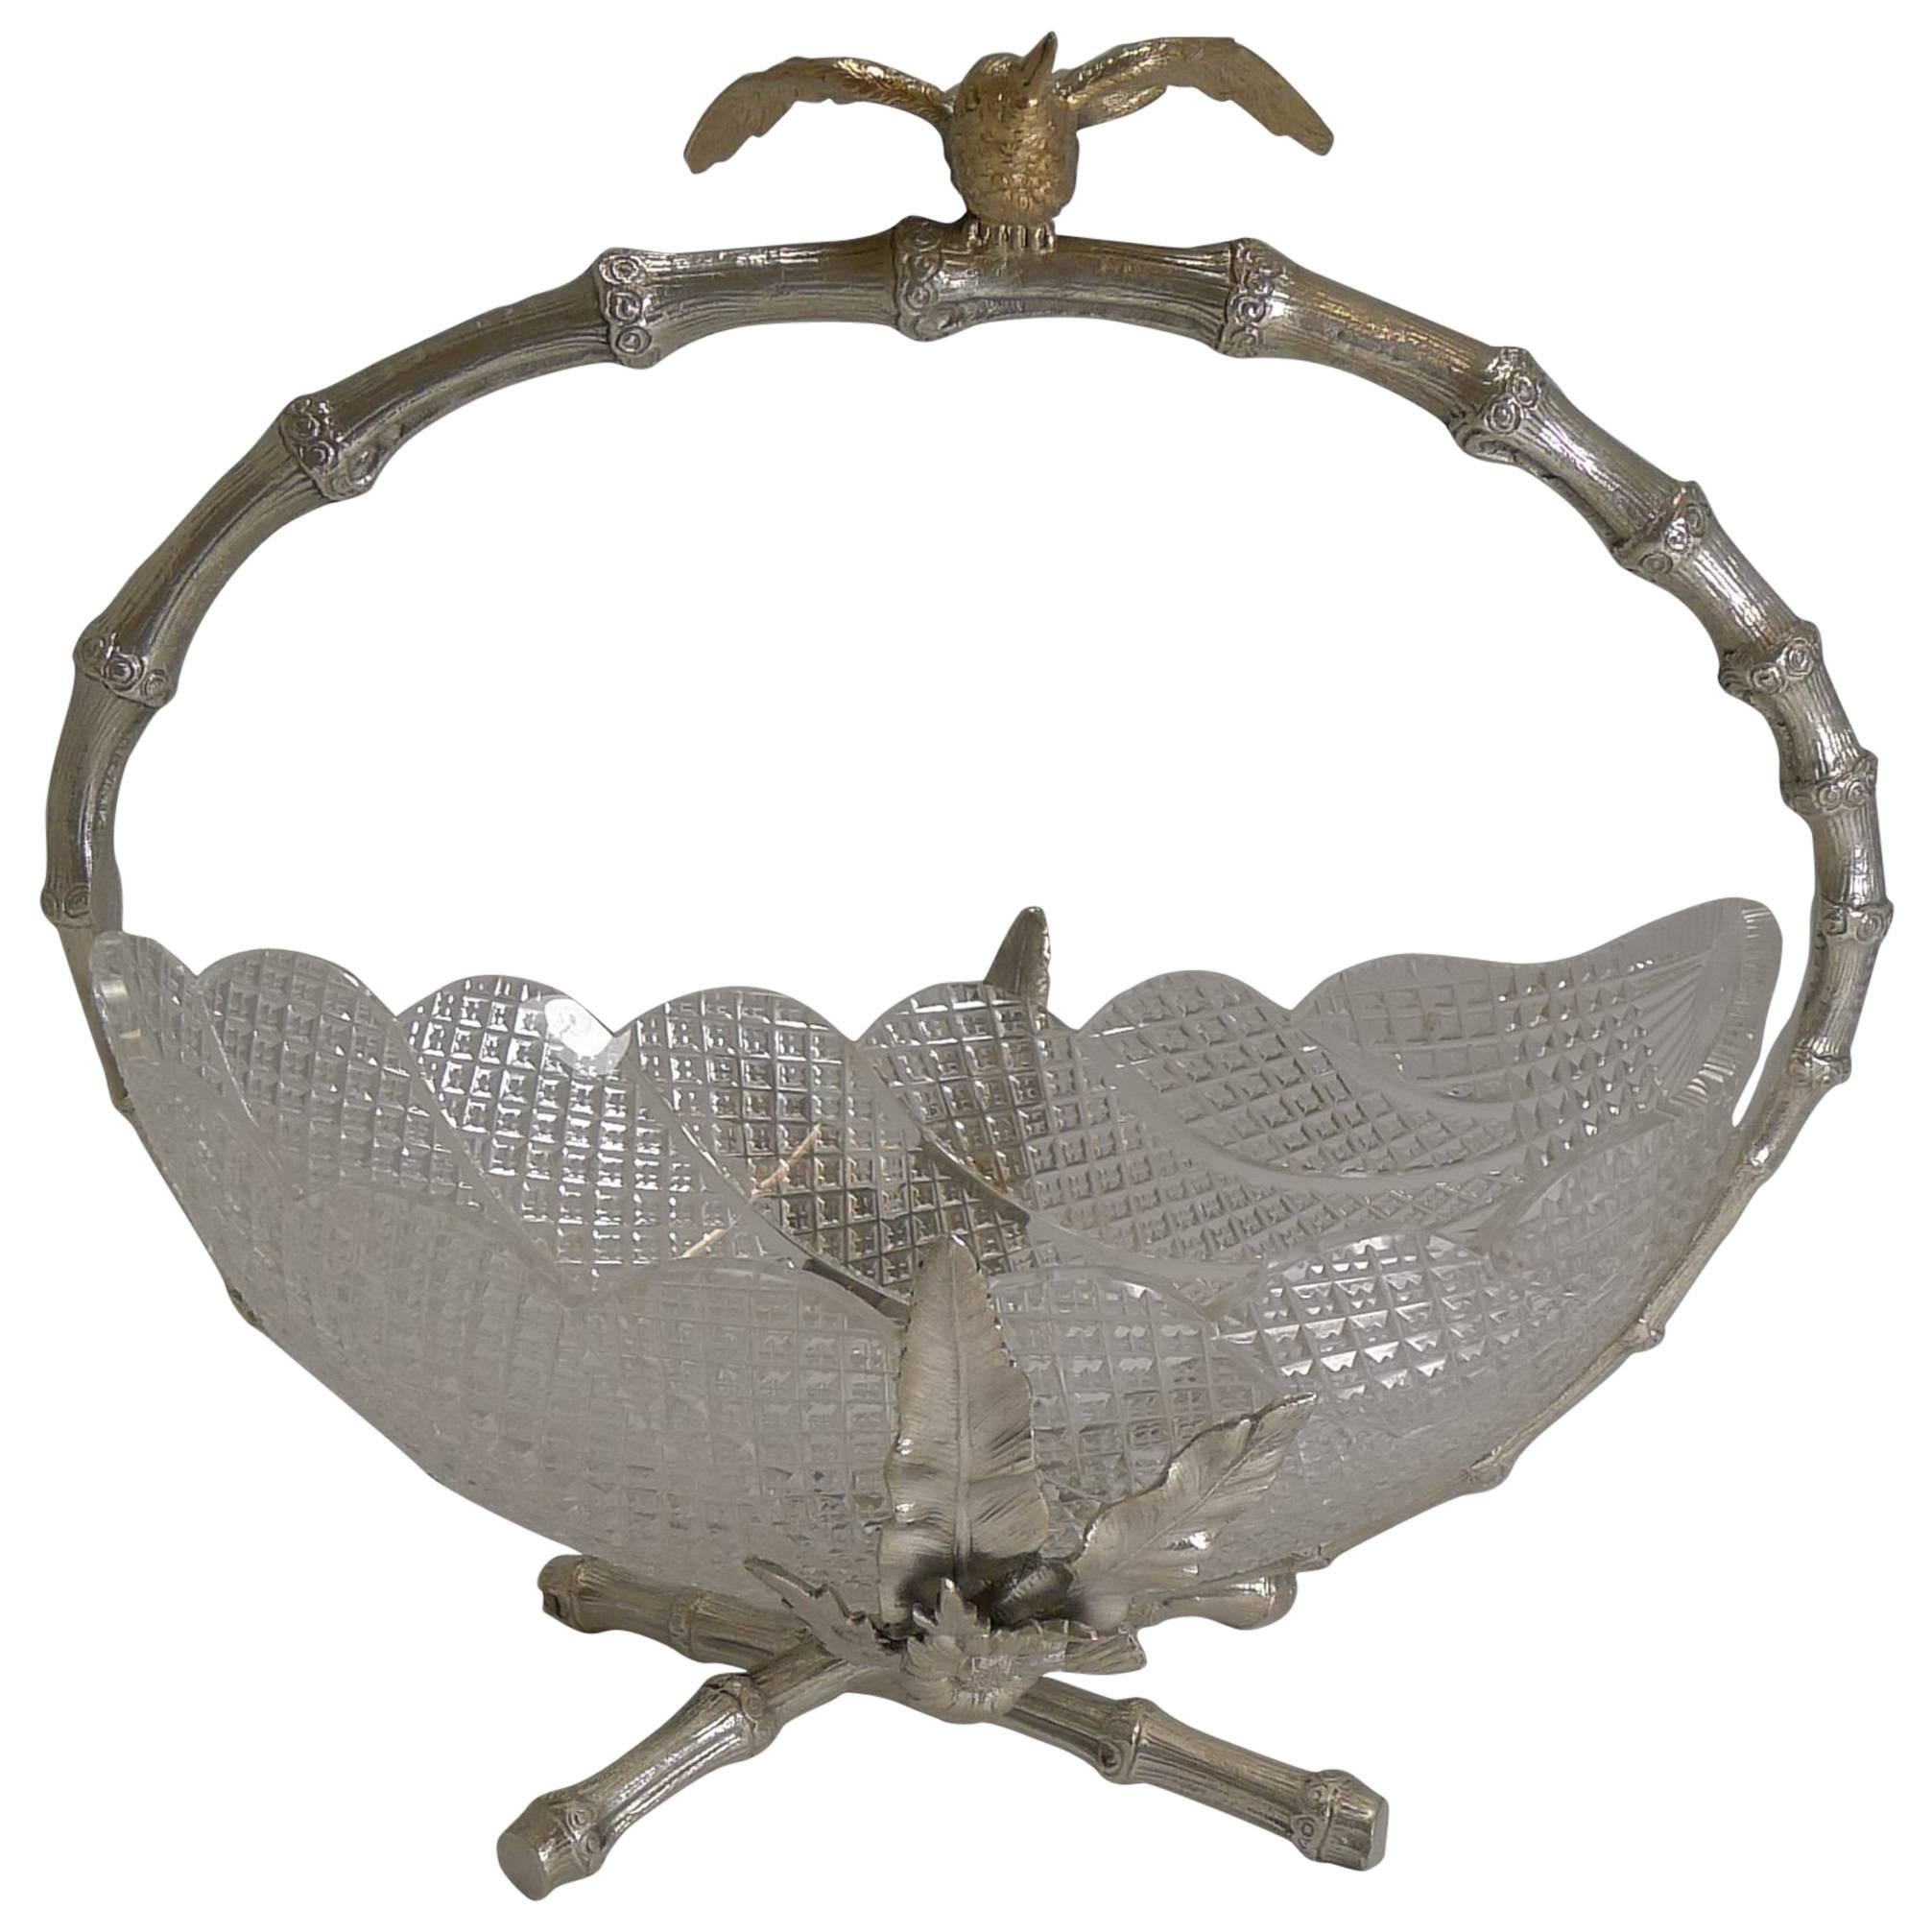 Finest Quality English Cut Crystal and Silver Plate Dish / Basket, circa 1880